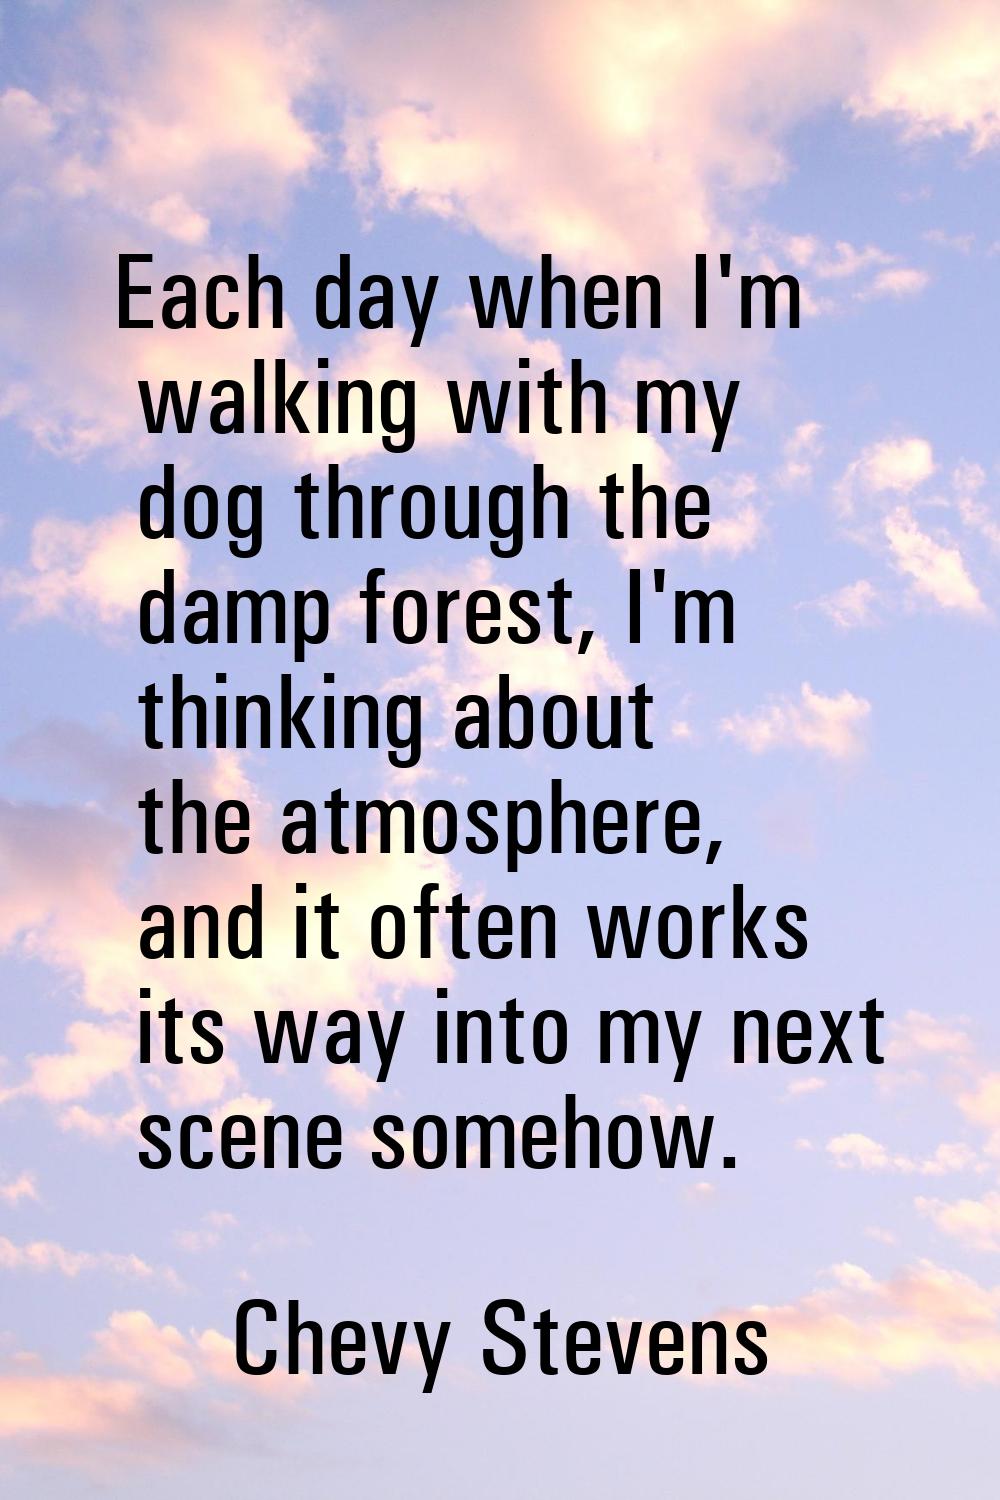 Each day when I'm walking with my dog through the damp forest, I'm thinking about the atmosphere, a